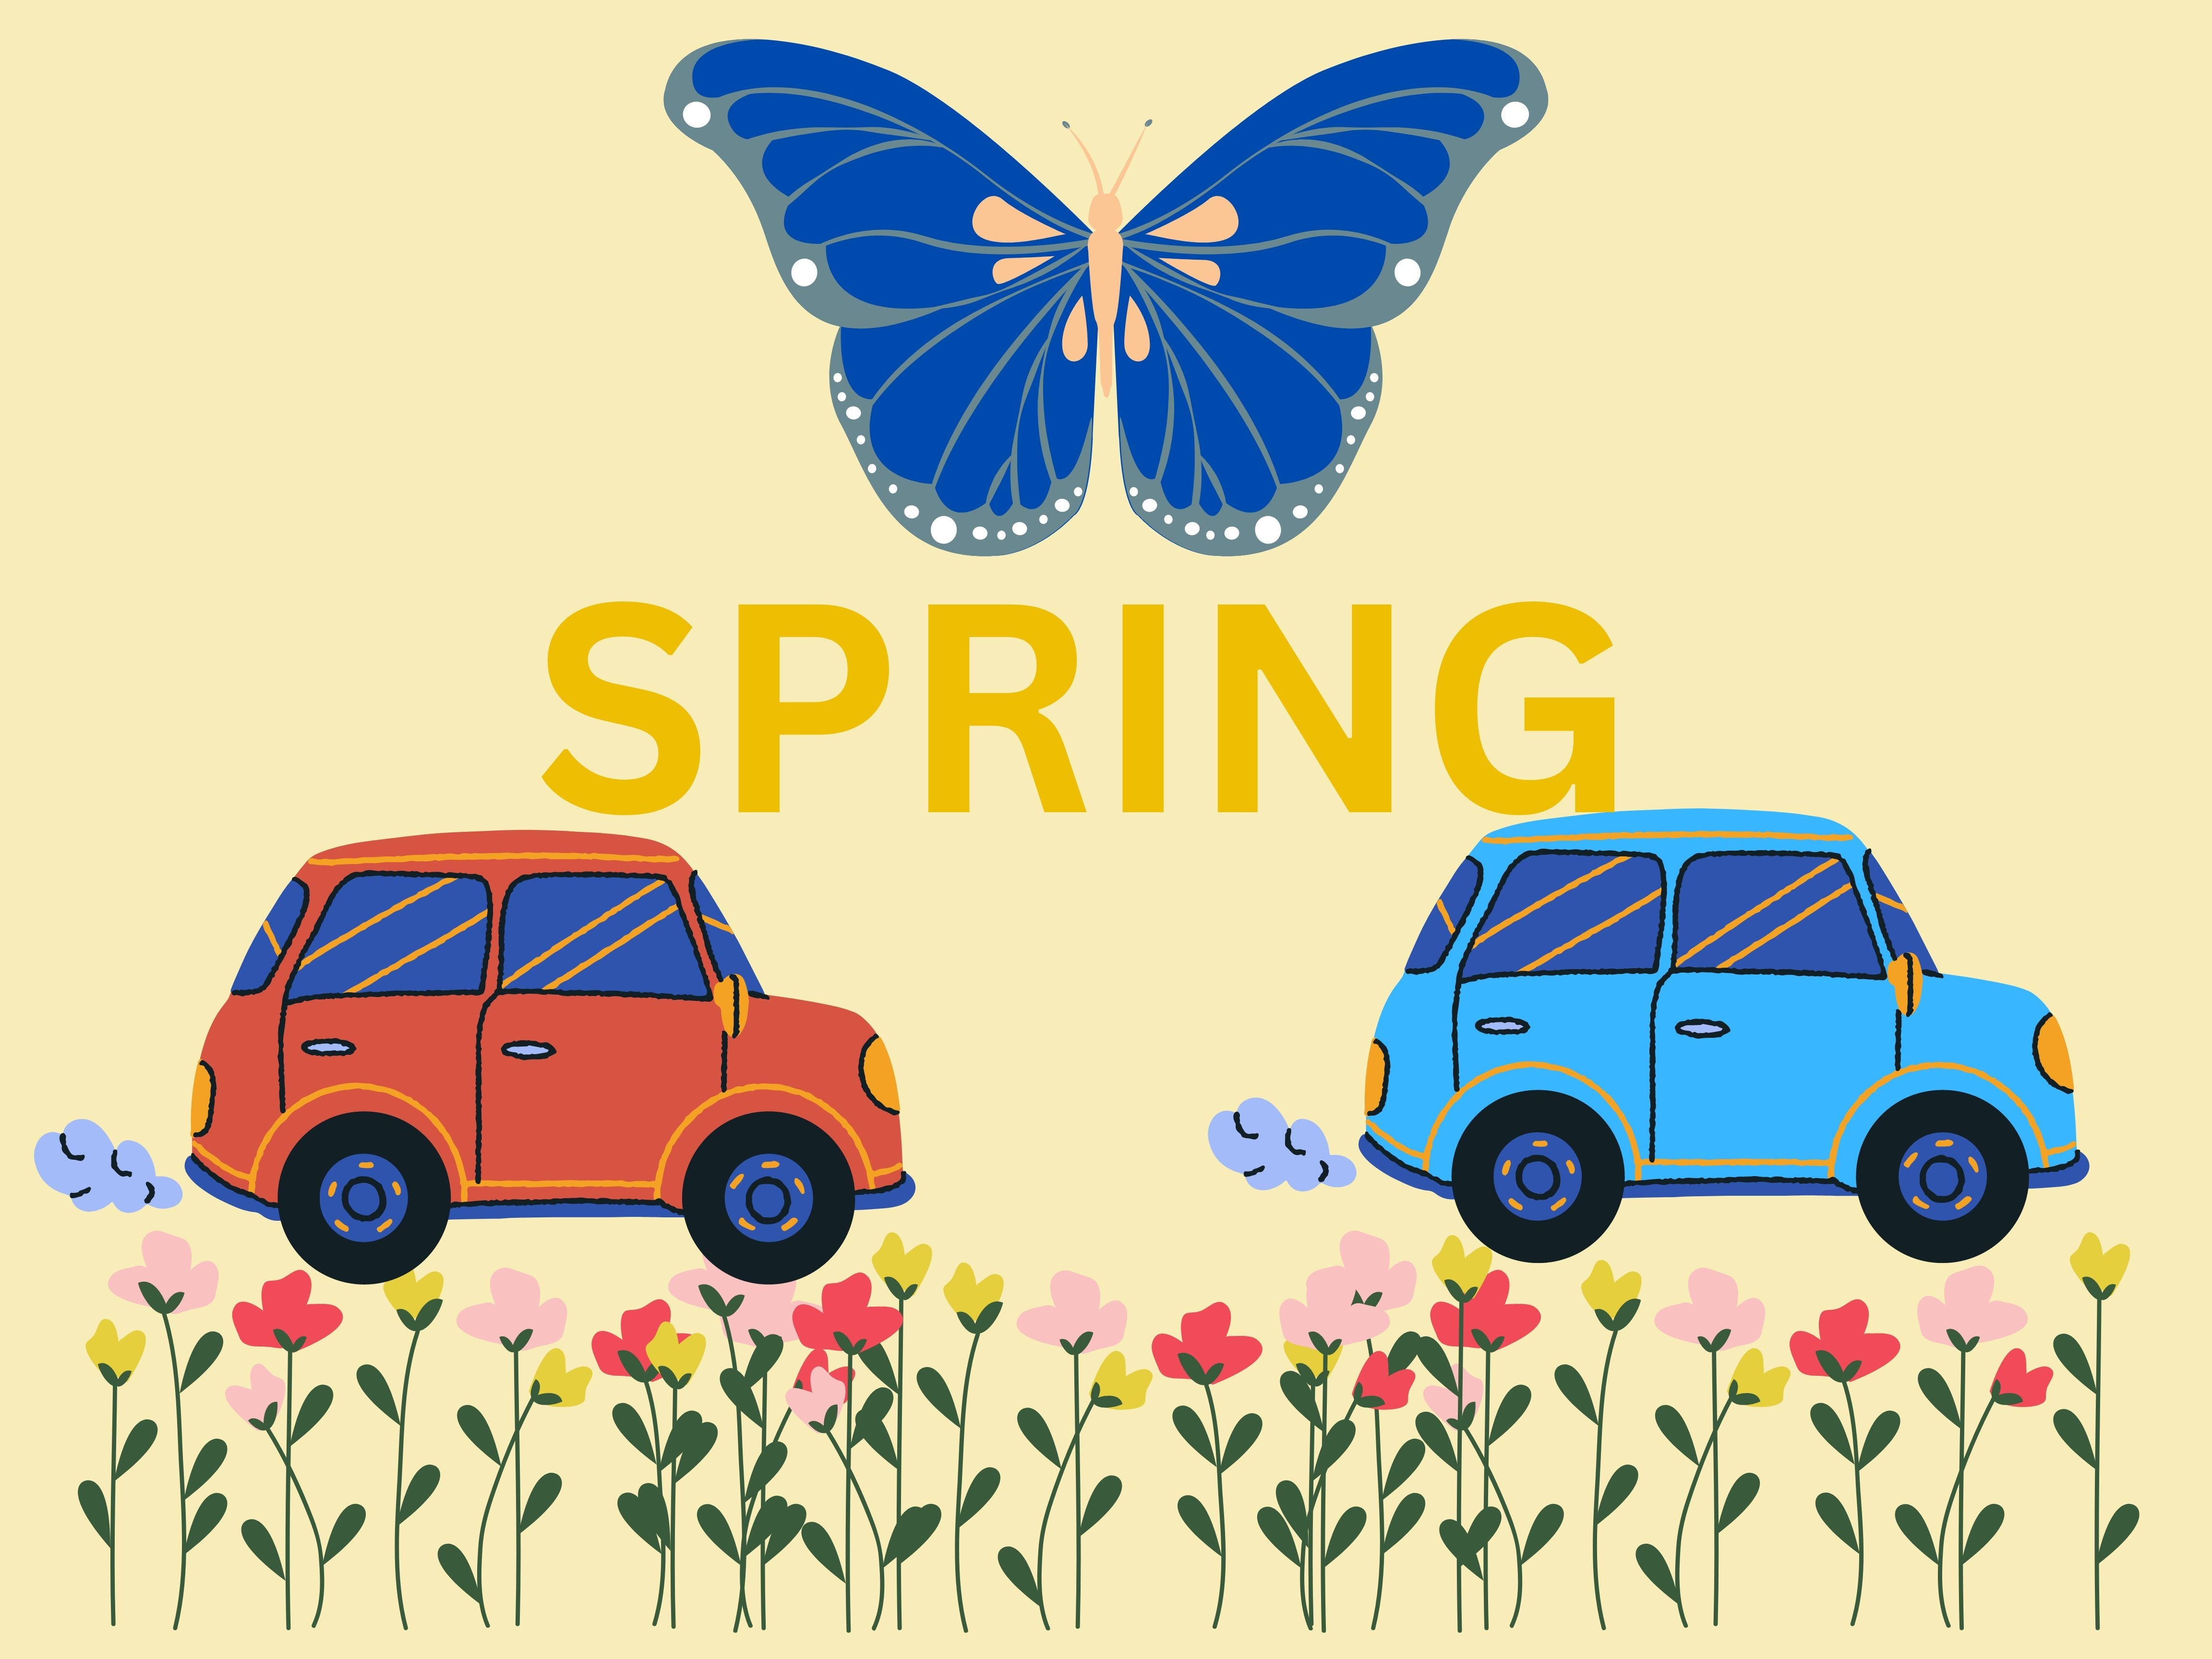 Ble butter fly over the word Spring, a red and blue car under the word spring over pink,yellow and red flowers